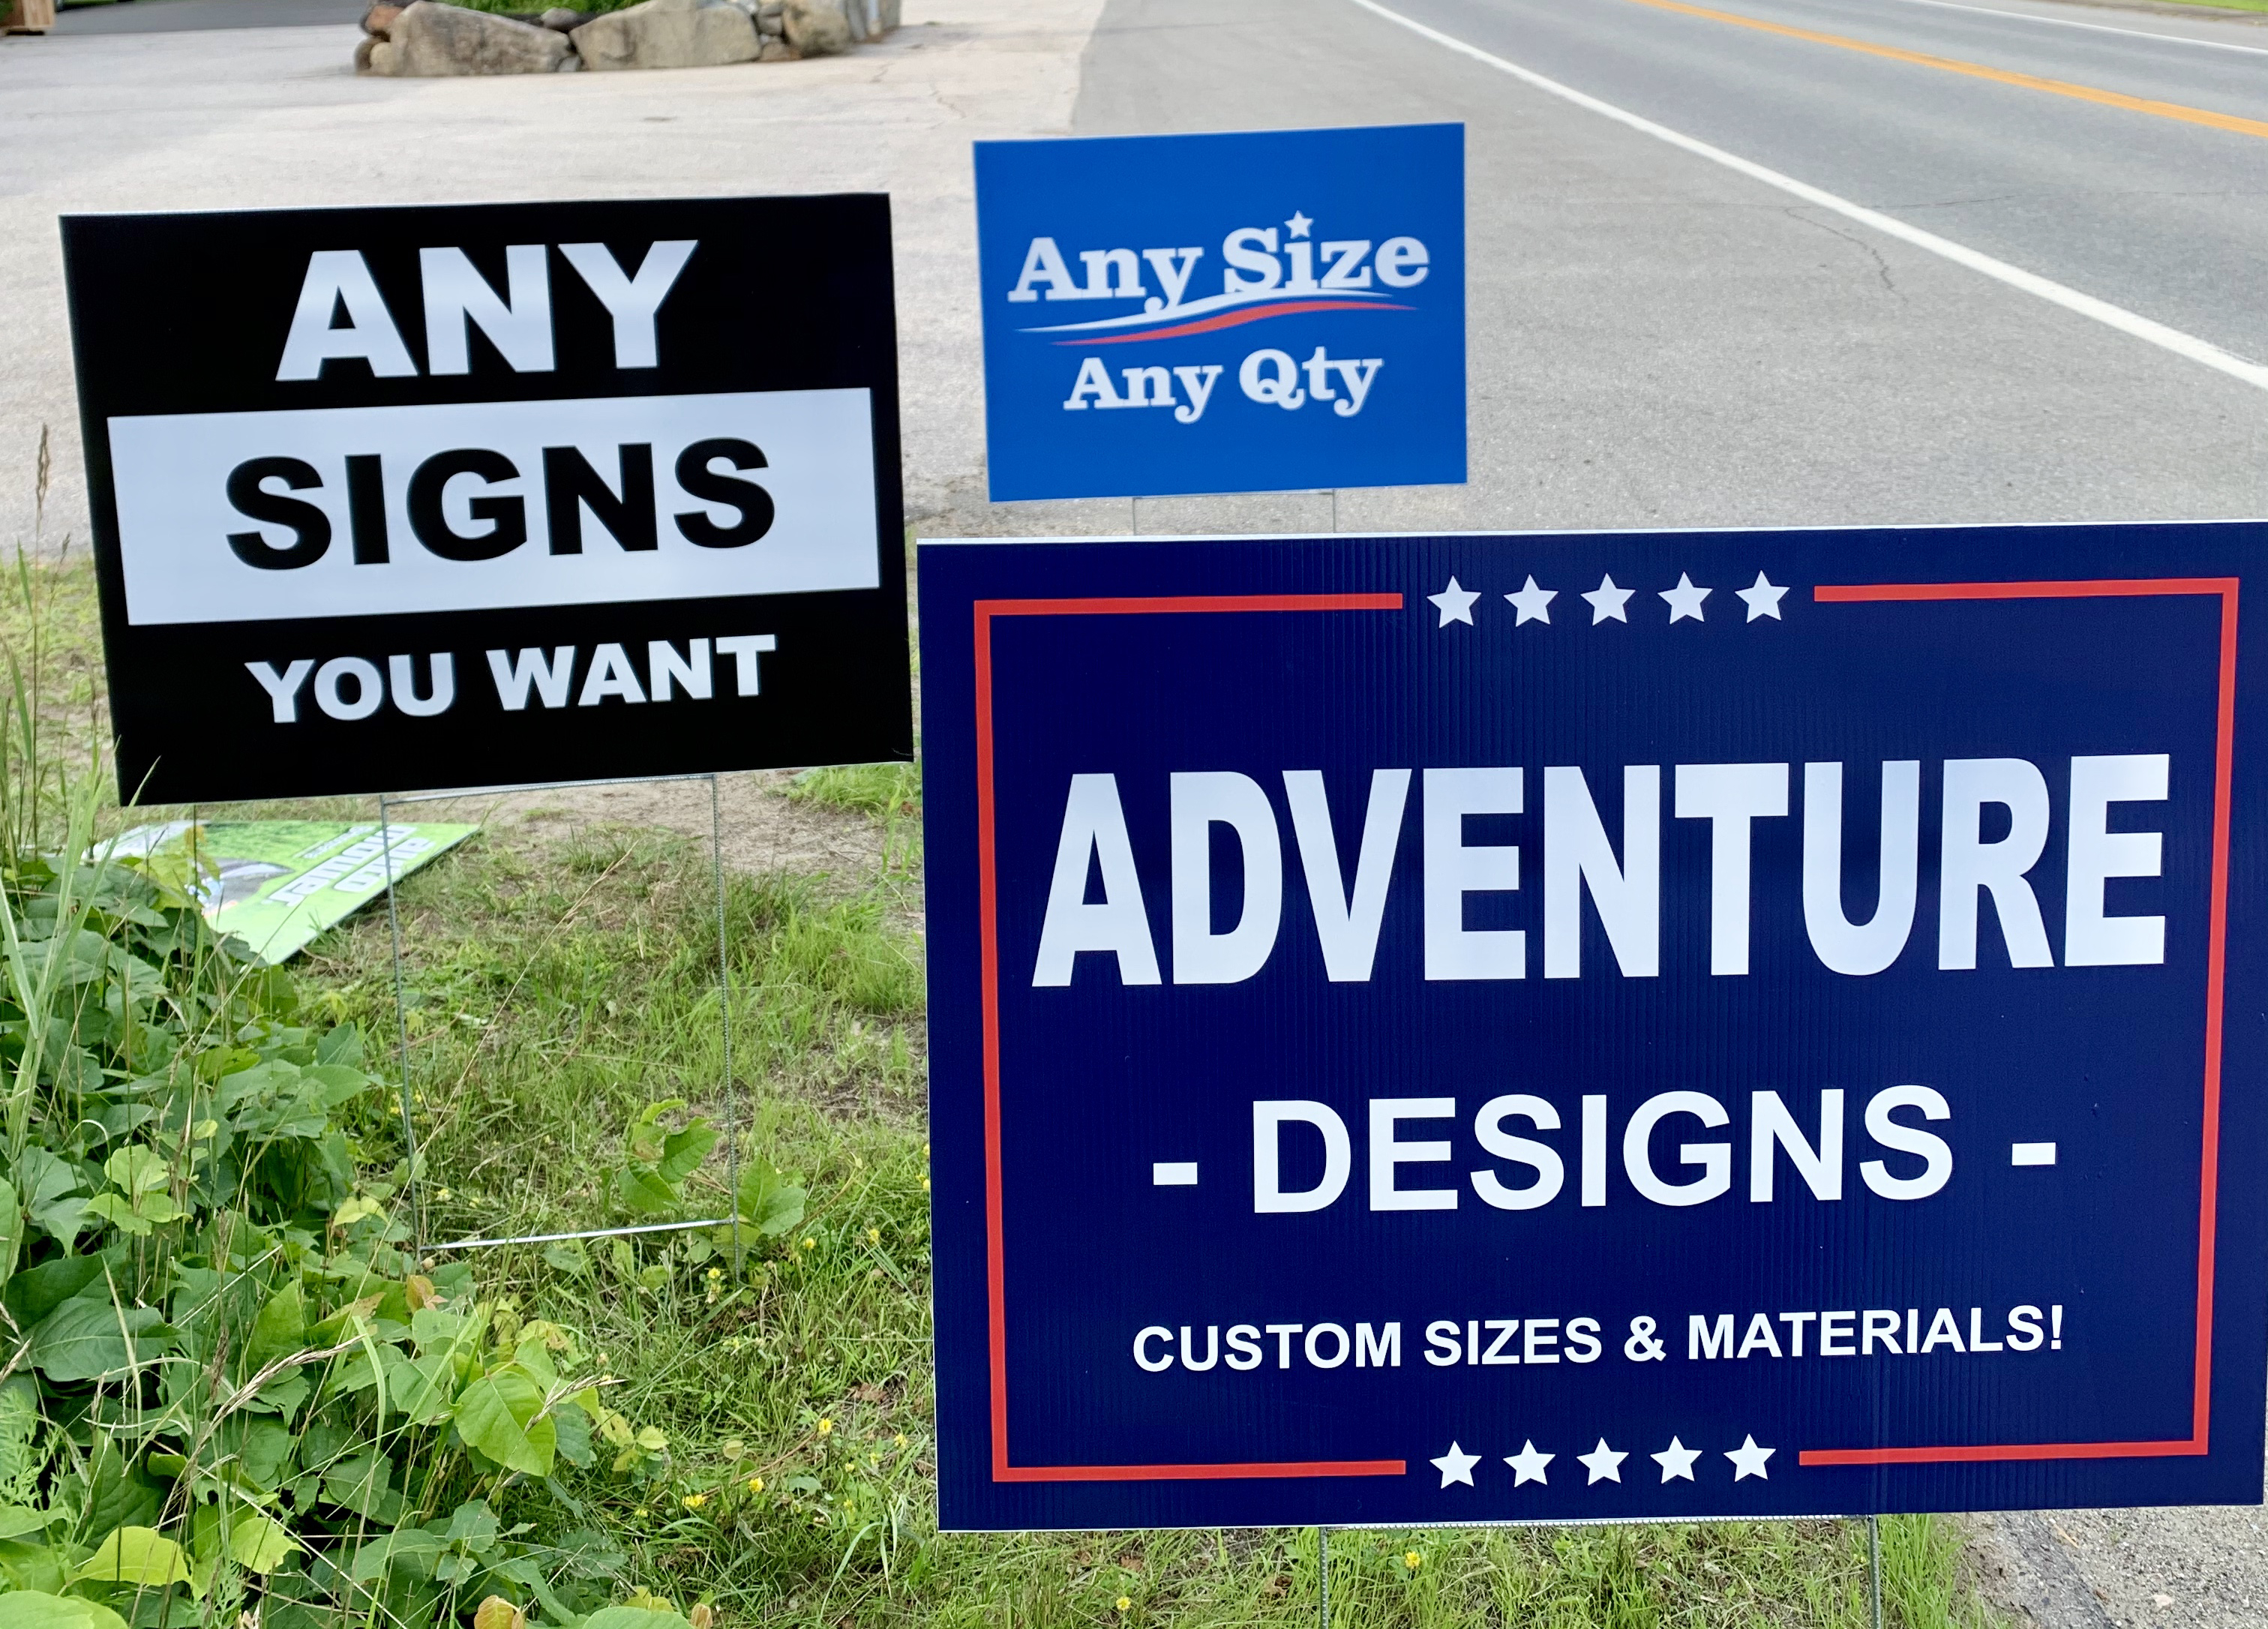 Yard Signs in Small Business Marketing: Boost Your Business Visibility